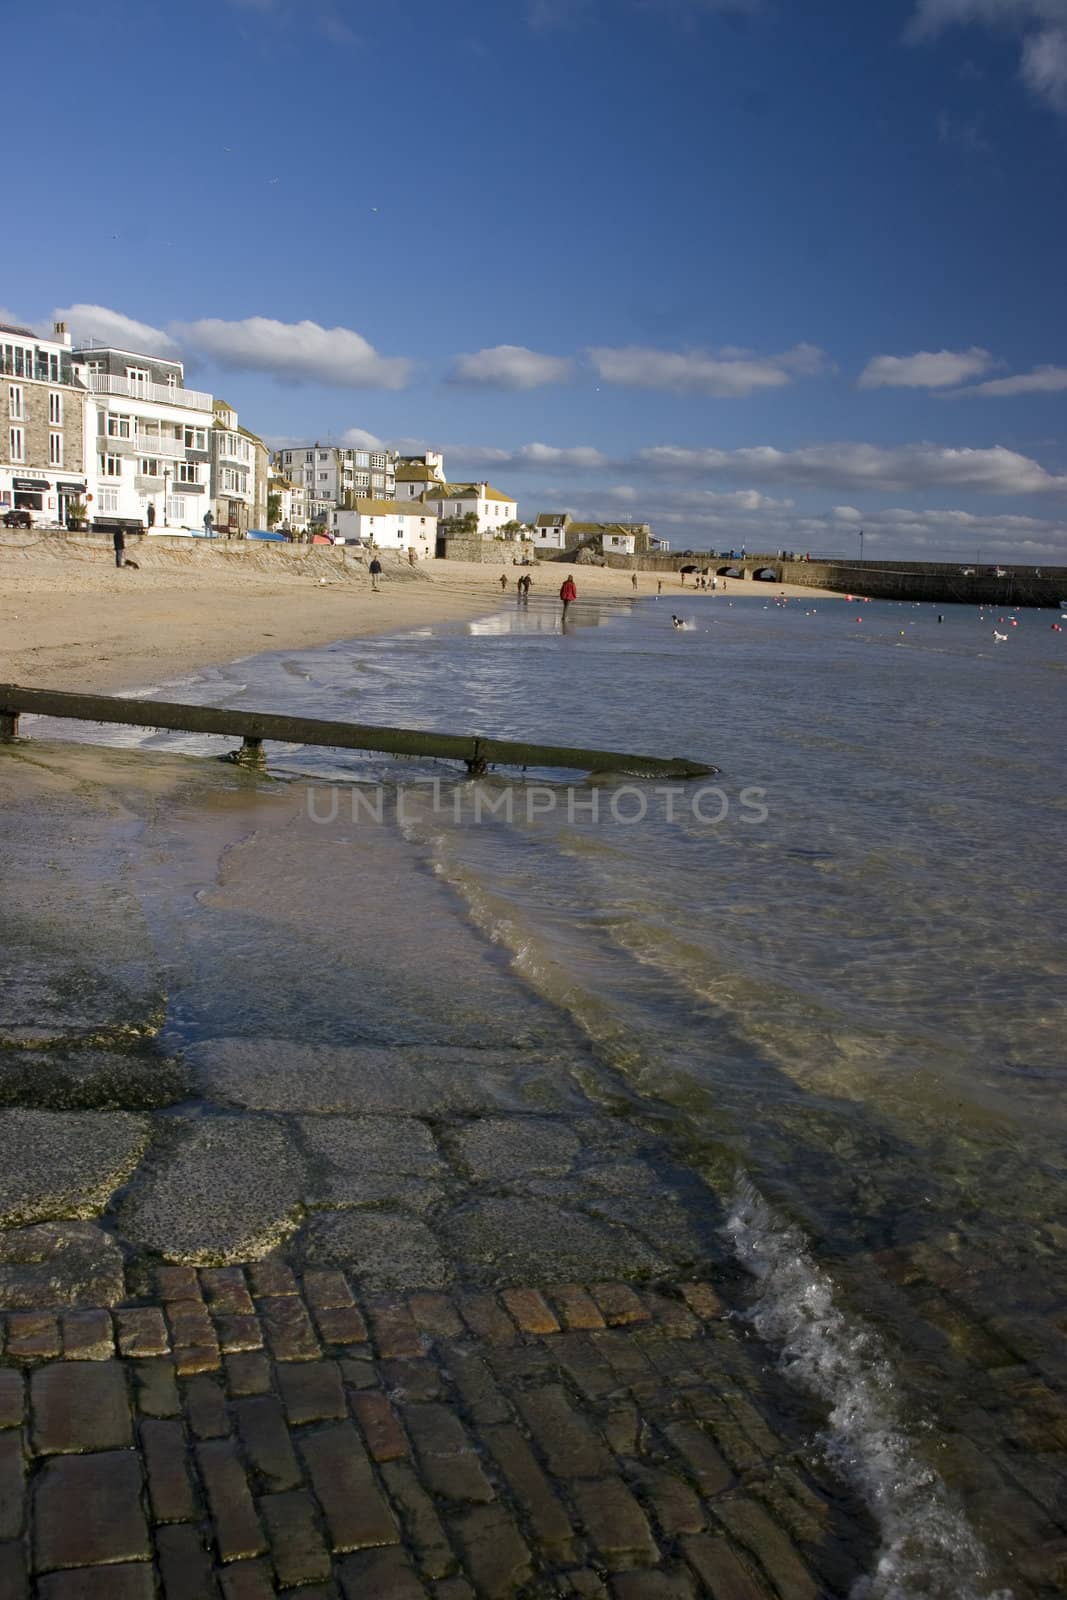 Water lapping up onto the beach at St Ives